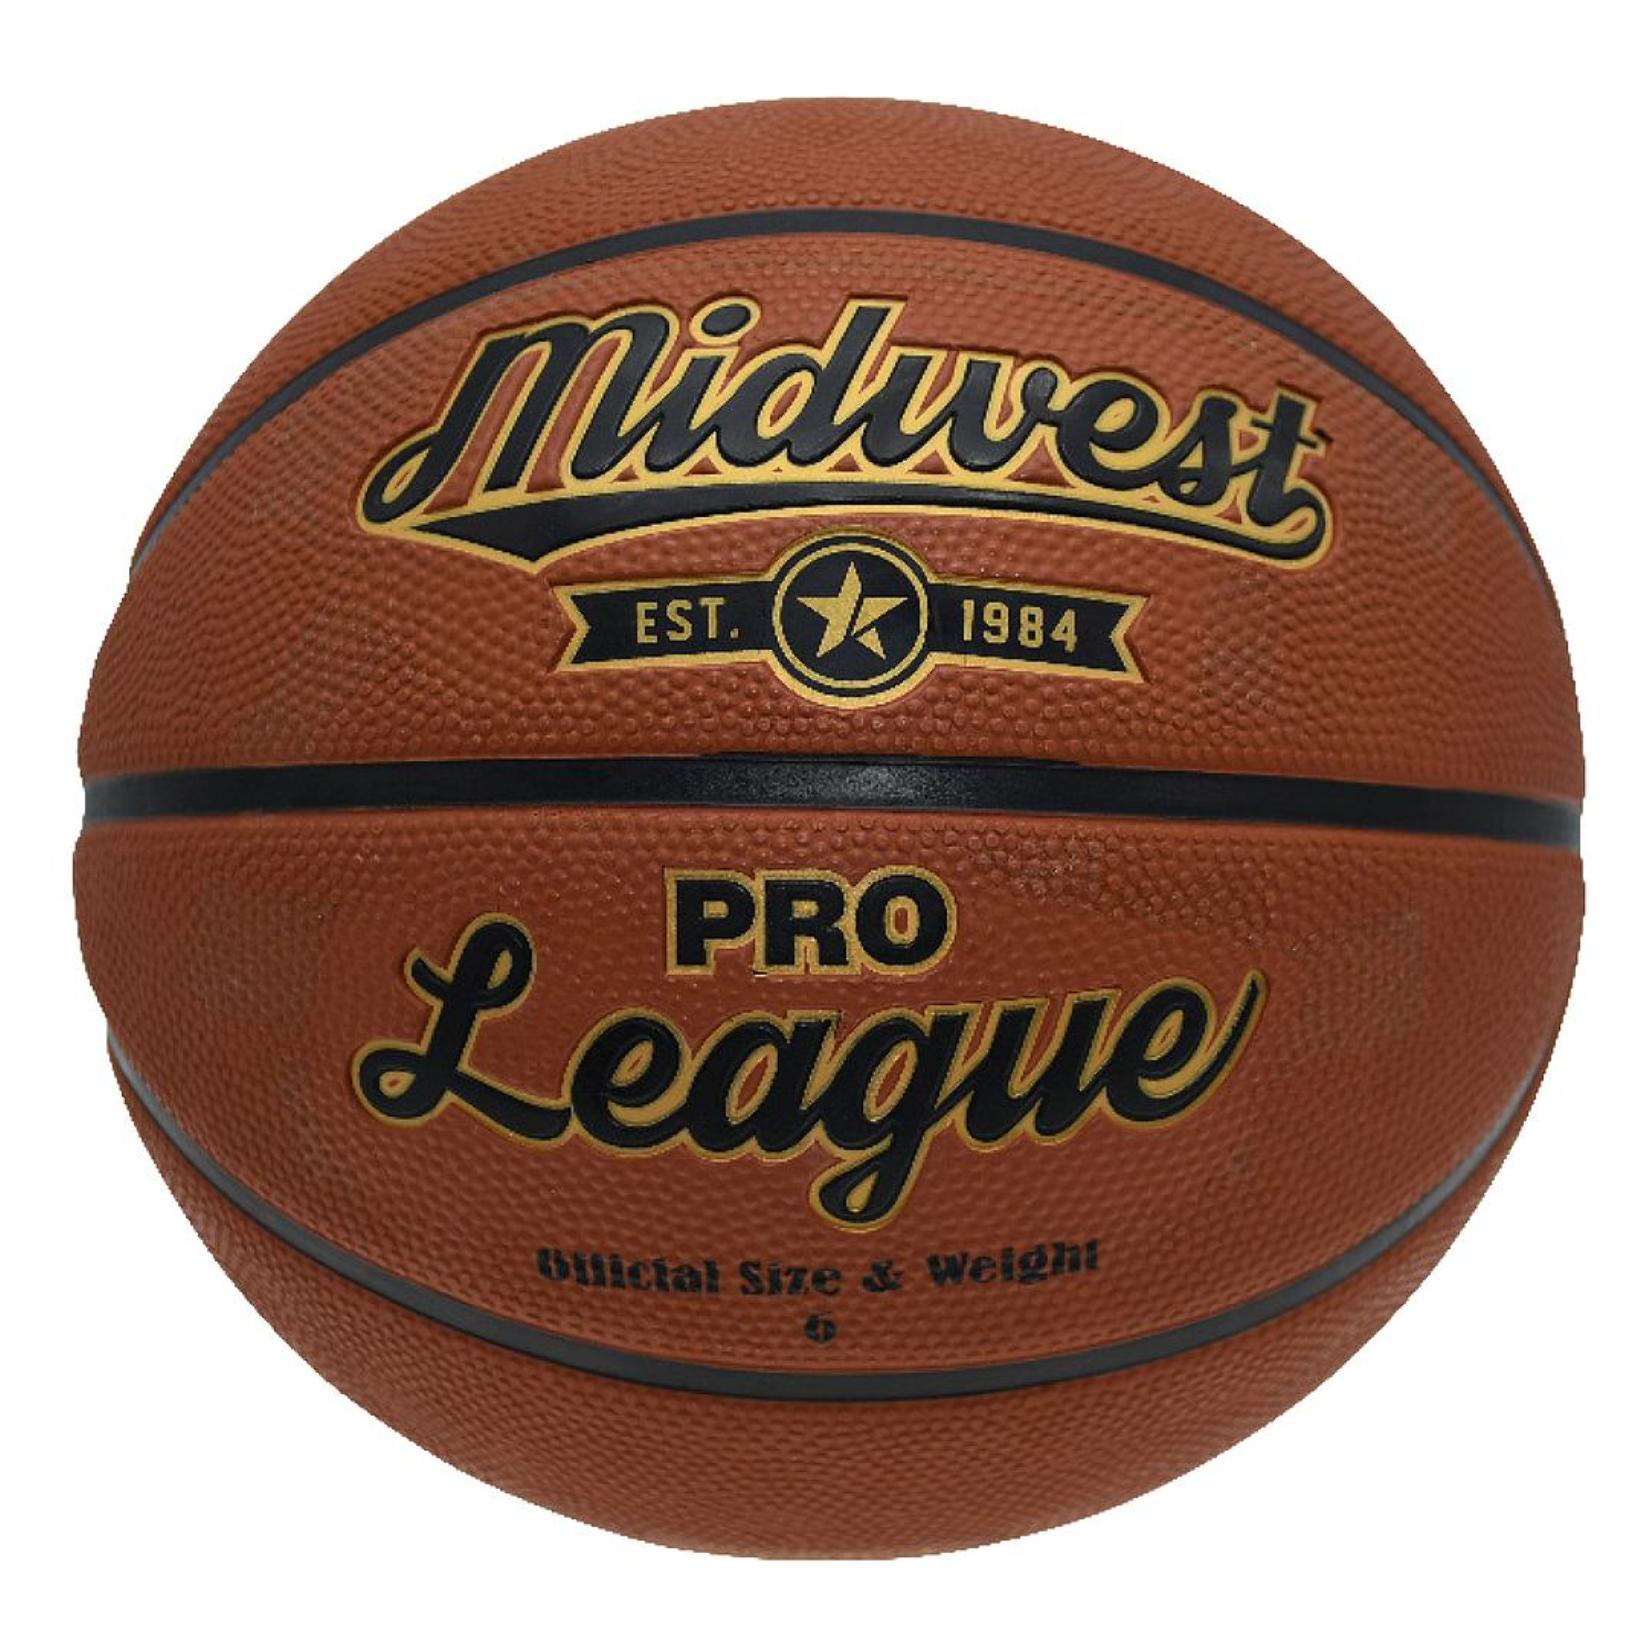 Midwest Pro League Basketball